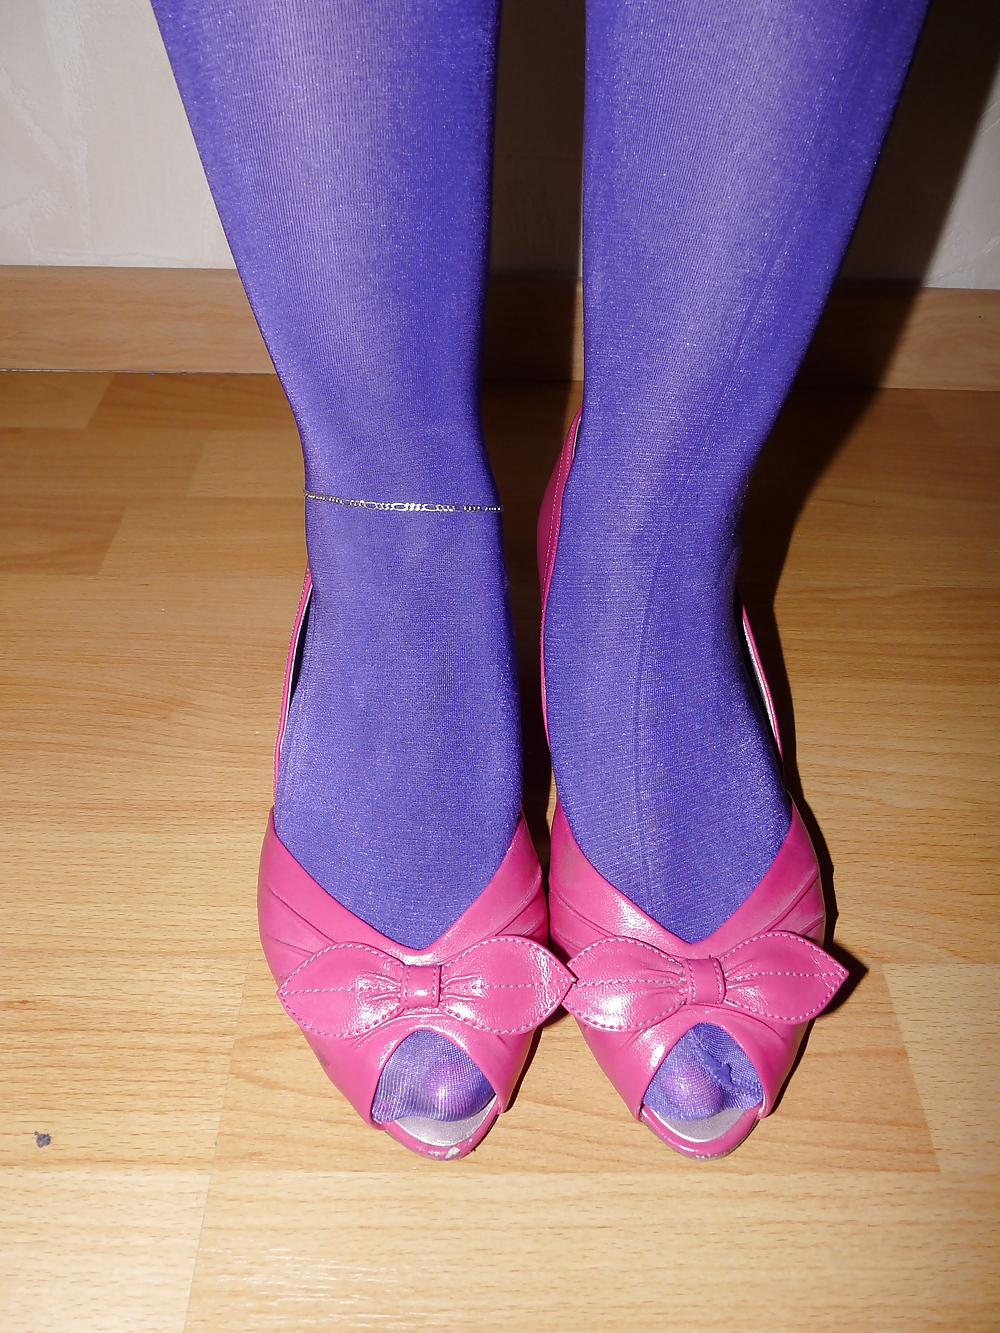 Sex Gallery wifes shiny purple pantyhose pink peep toes